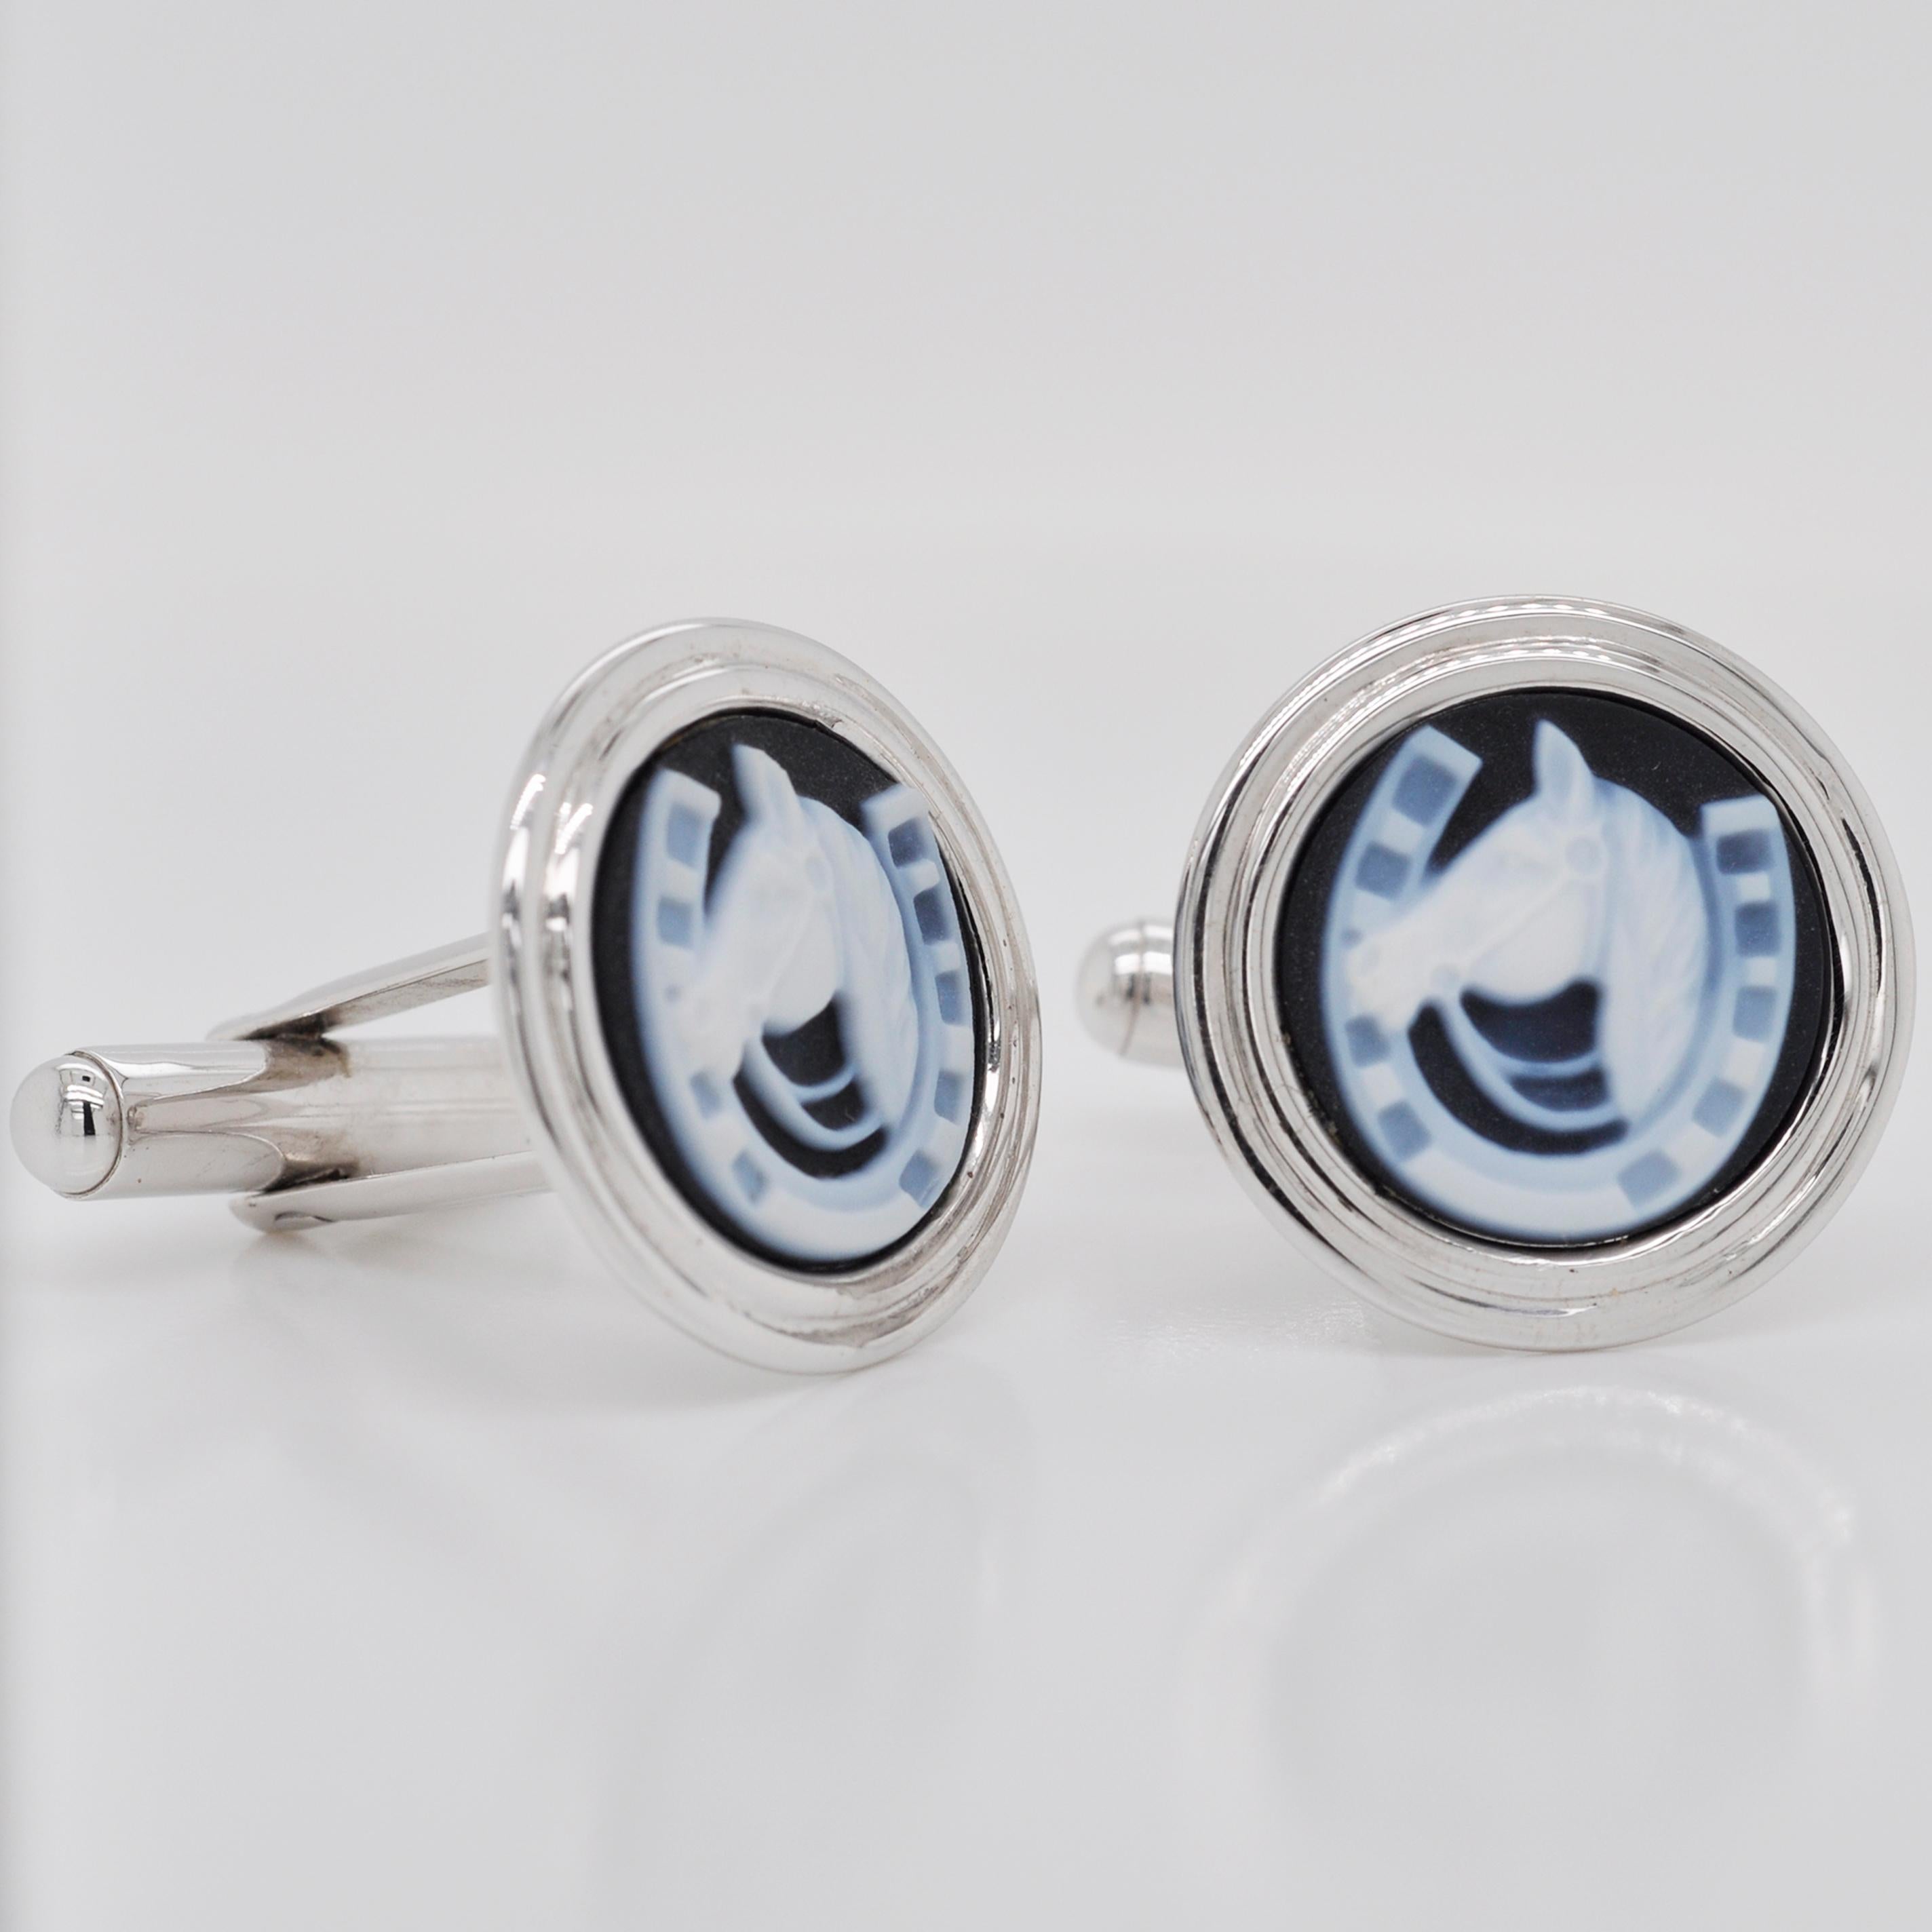 Hand-Carved Horse-Shoe Agate Carving Sterling Silver Contemporary Cufflinks 1